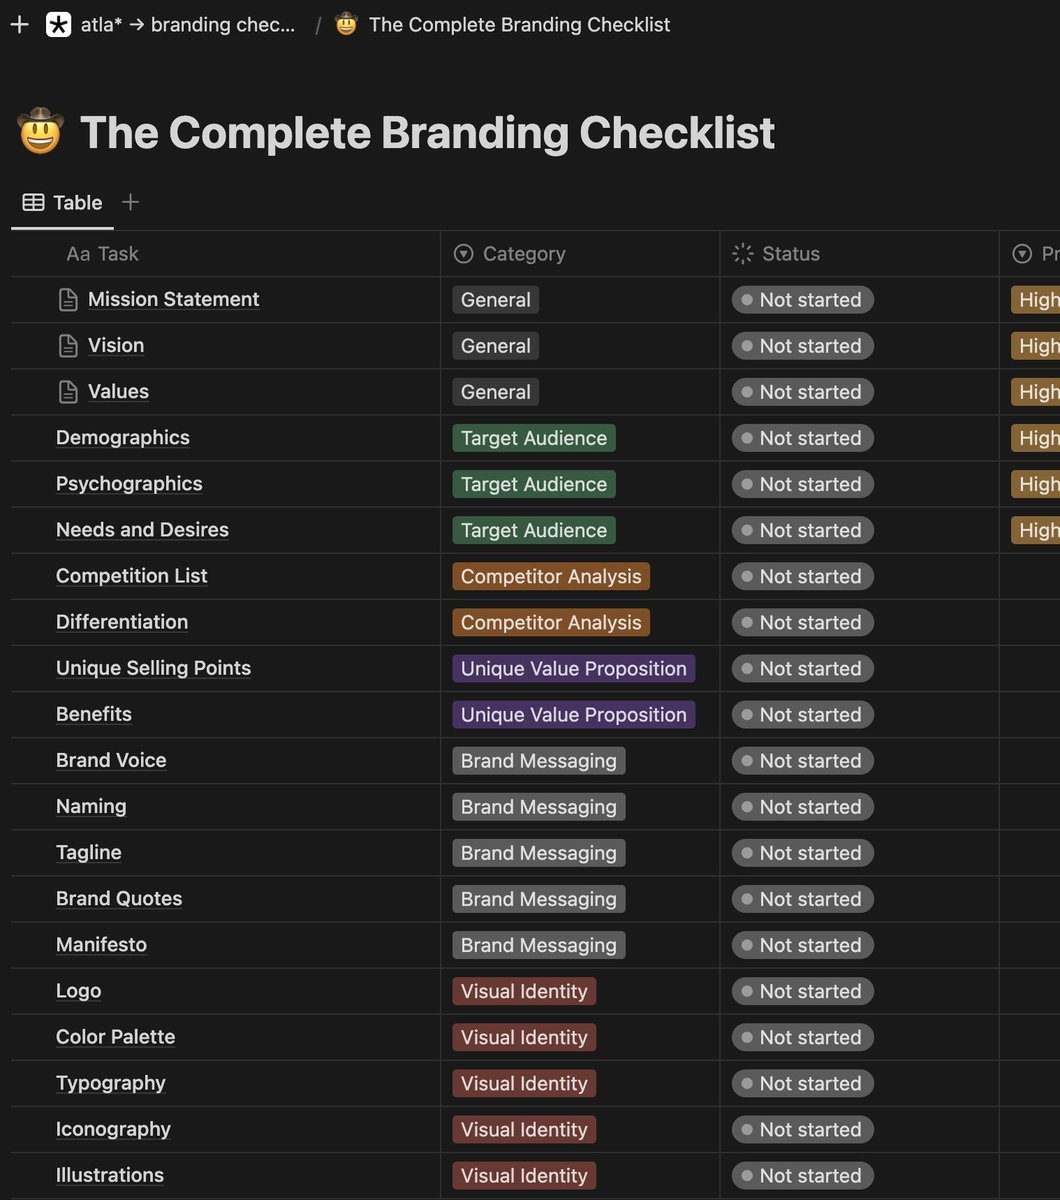 ⚡️ The Branding Checklist I've been working on this for some time; I softly launched it during the weekend and received great feedback. The idea is to keep updating it and make it the best free resource for founders building a brand. Reply 'Brand' + RT to get the beta version.